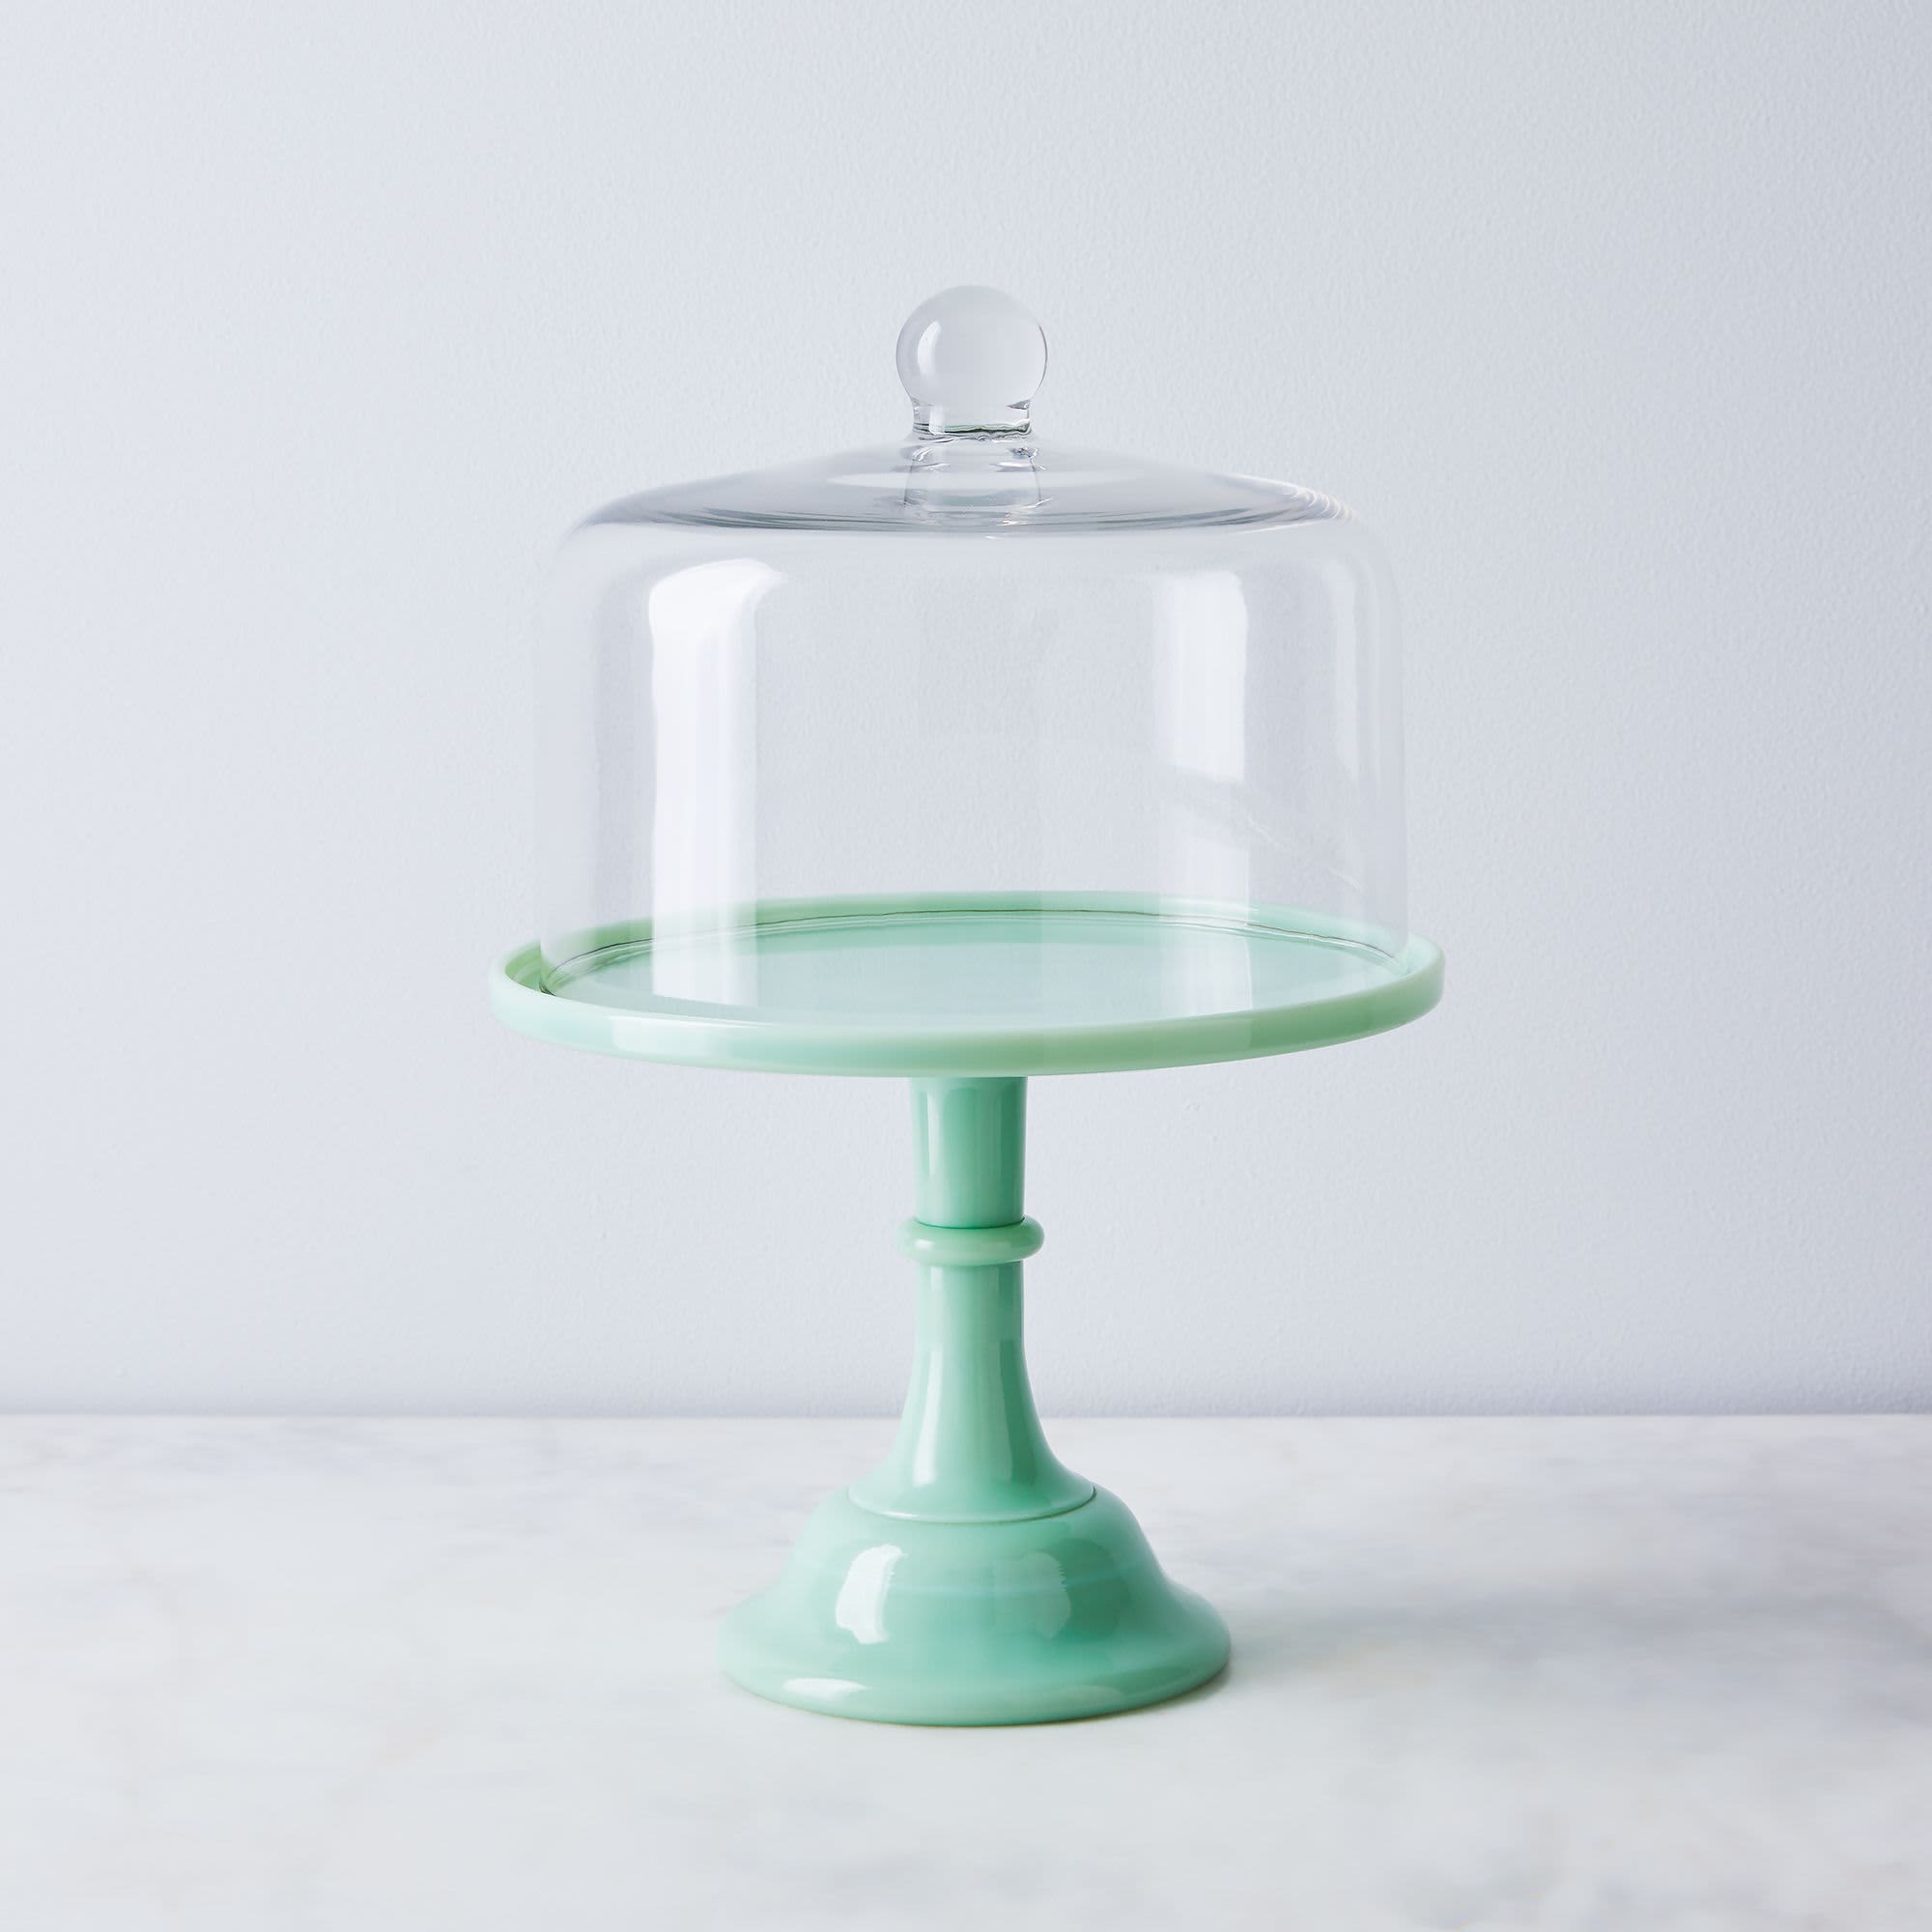 Marble & Walnut Rotating Cake Stand on Food52